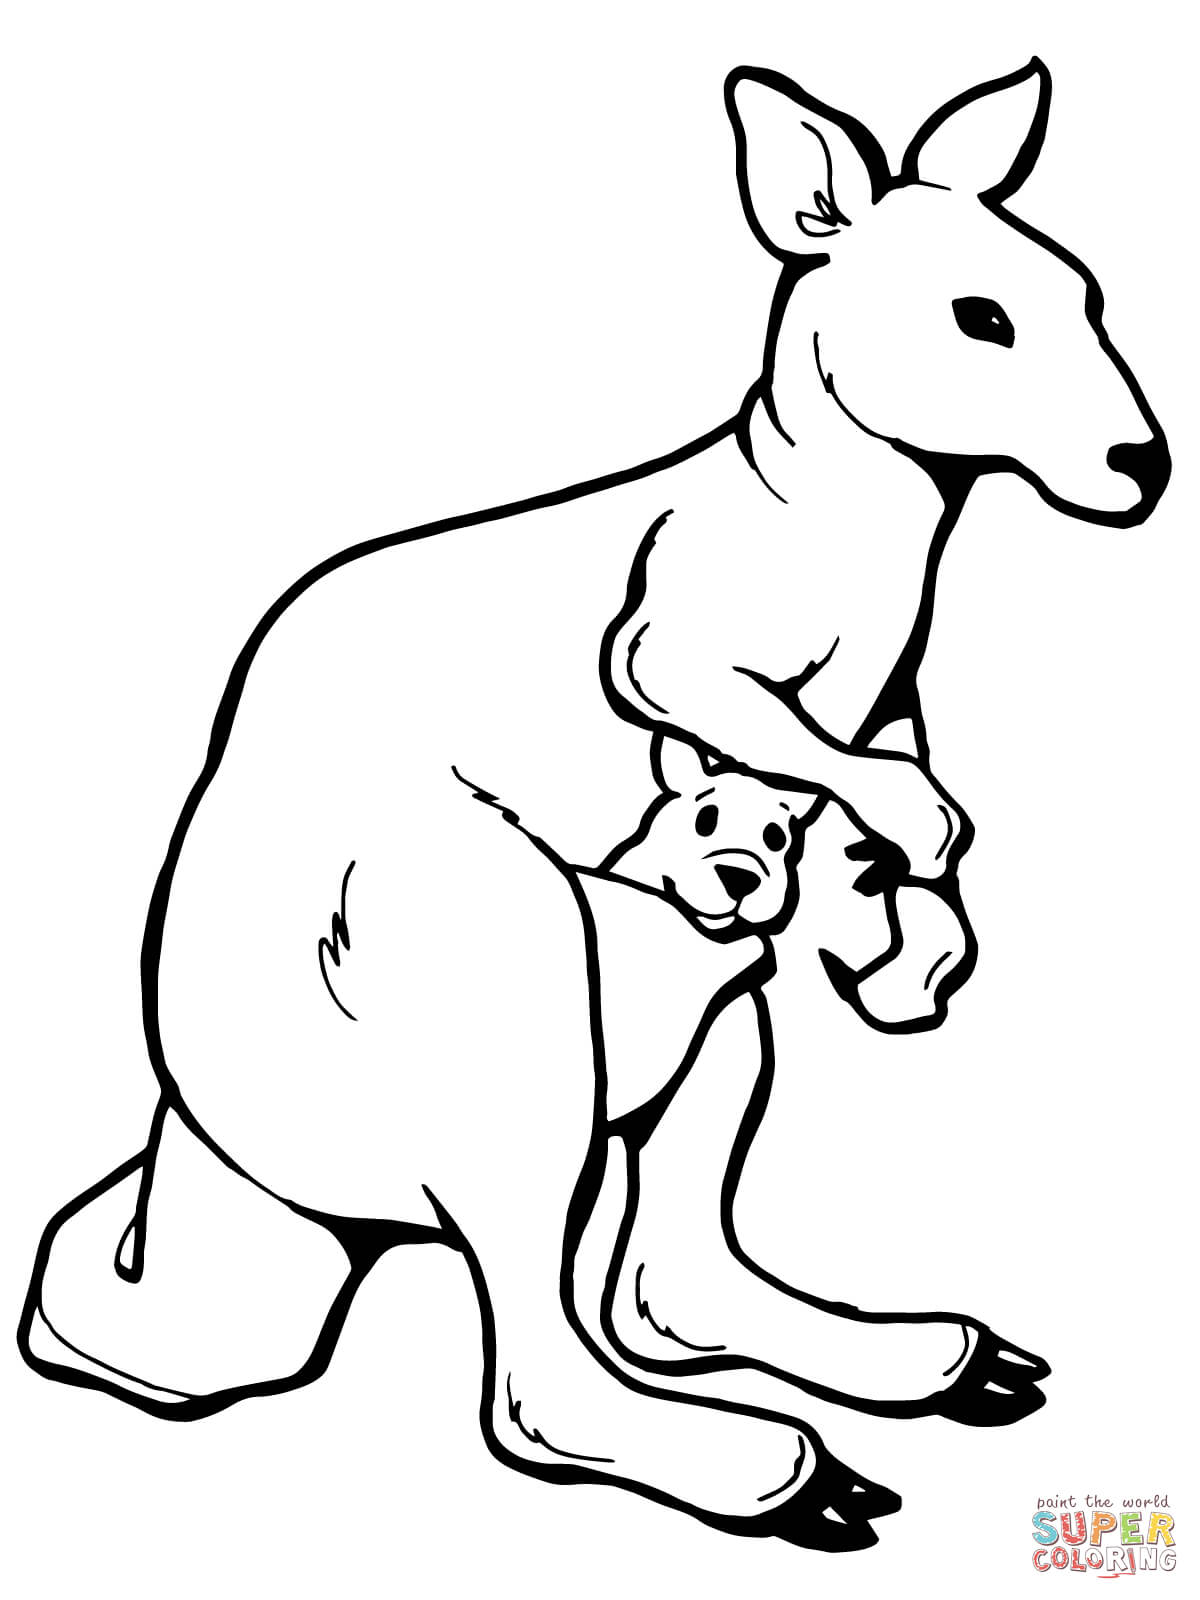 Cute Kangaroo with A Joey coloring page | Free Printable Coloring ...